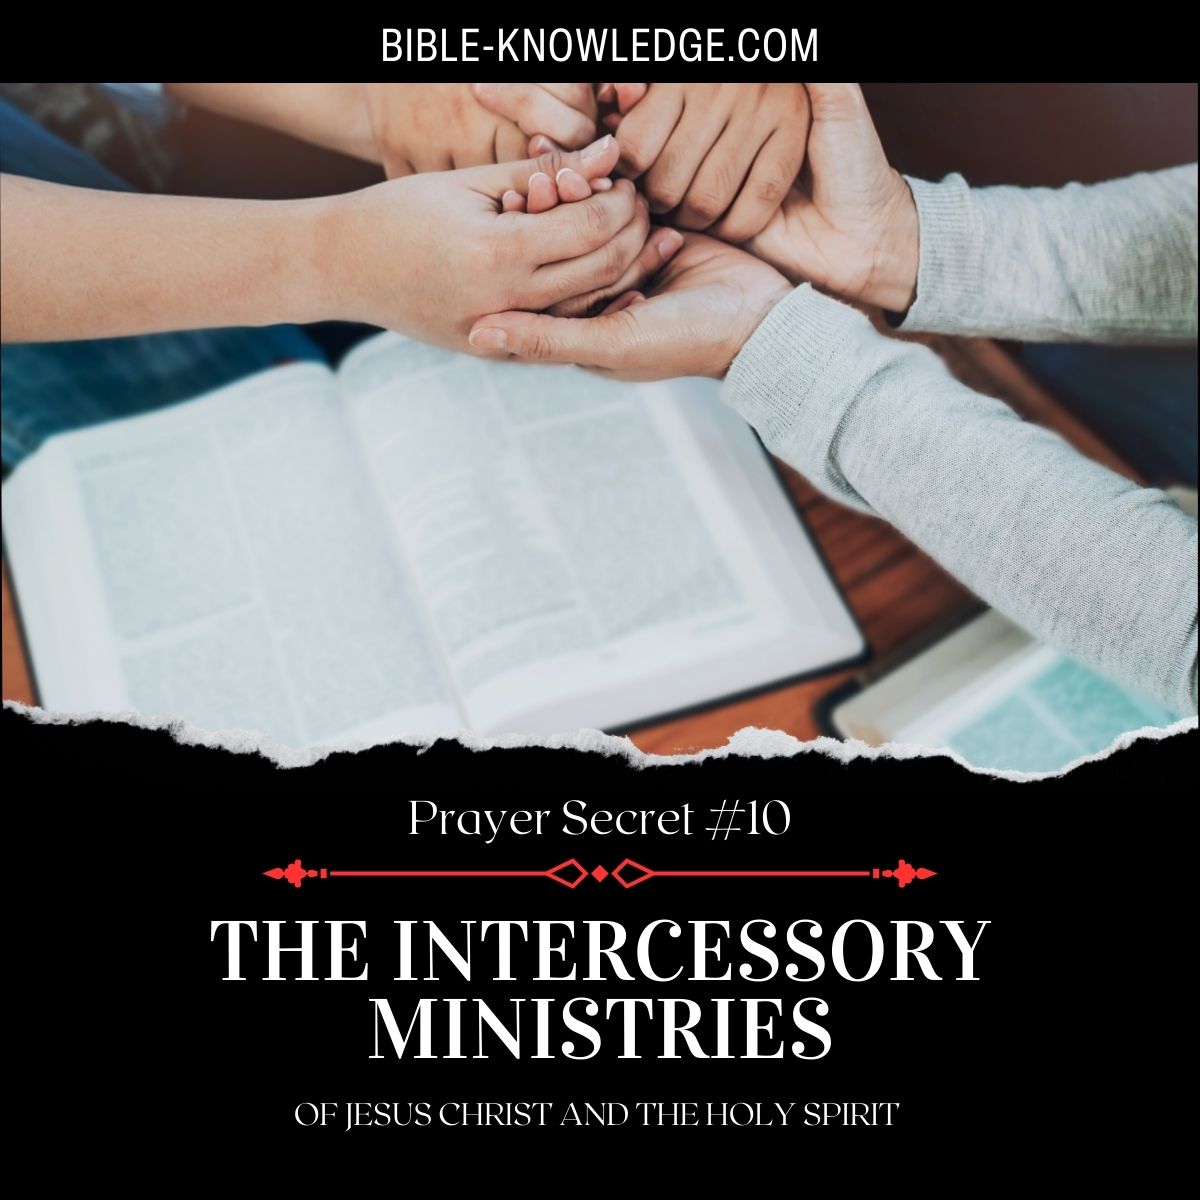 The Intercessory Ministries of Jesus Christ and the Holy Spirit